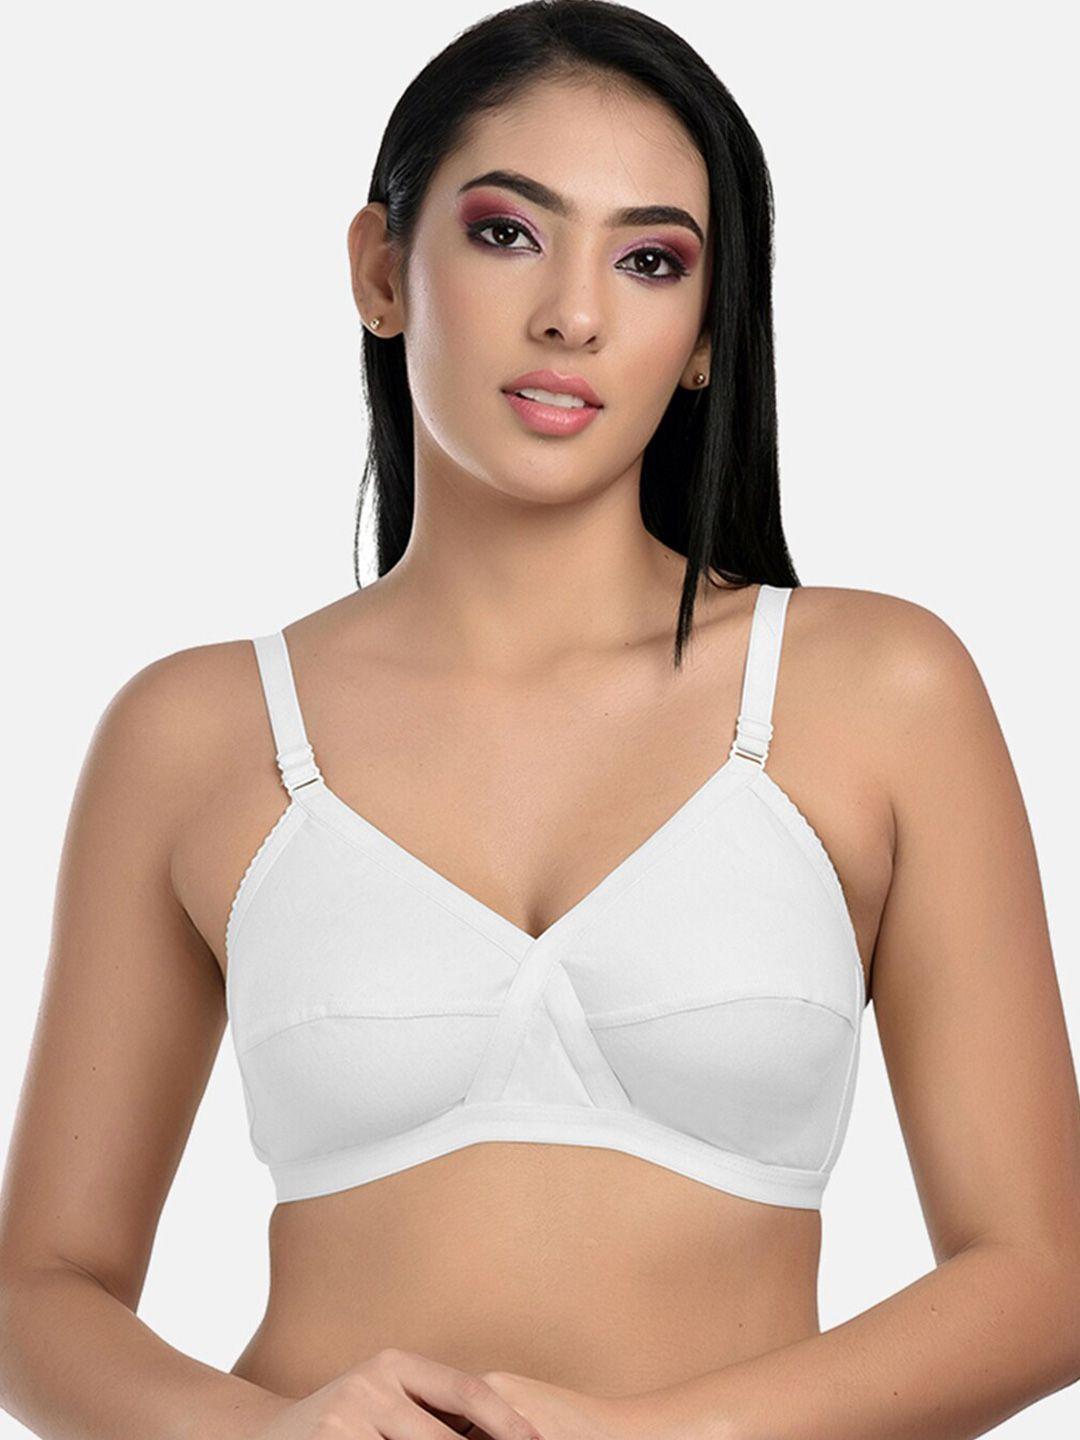 styfun  dry-fit non padded cut & sew non wired full coverage cotton everyday bra